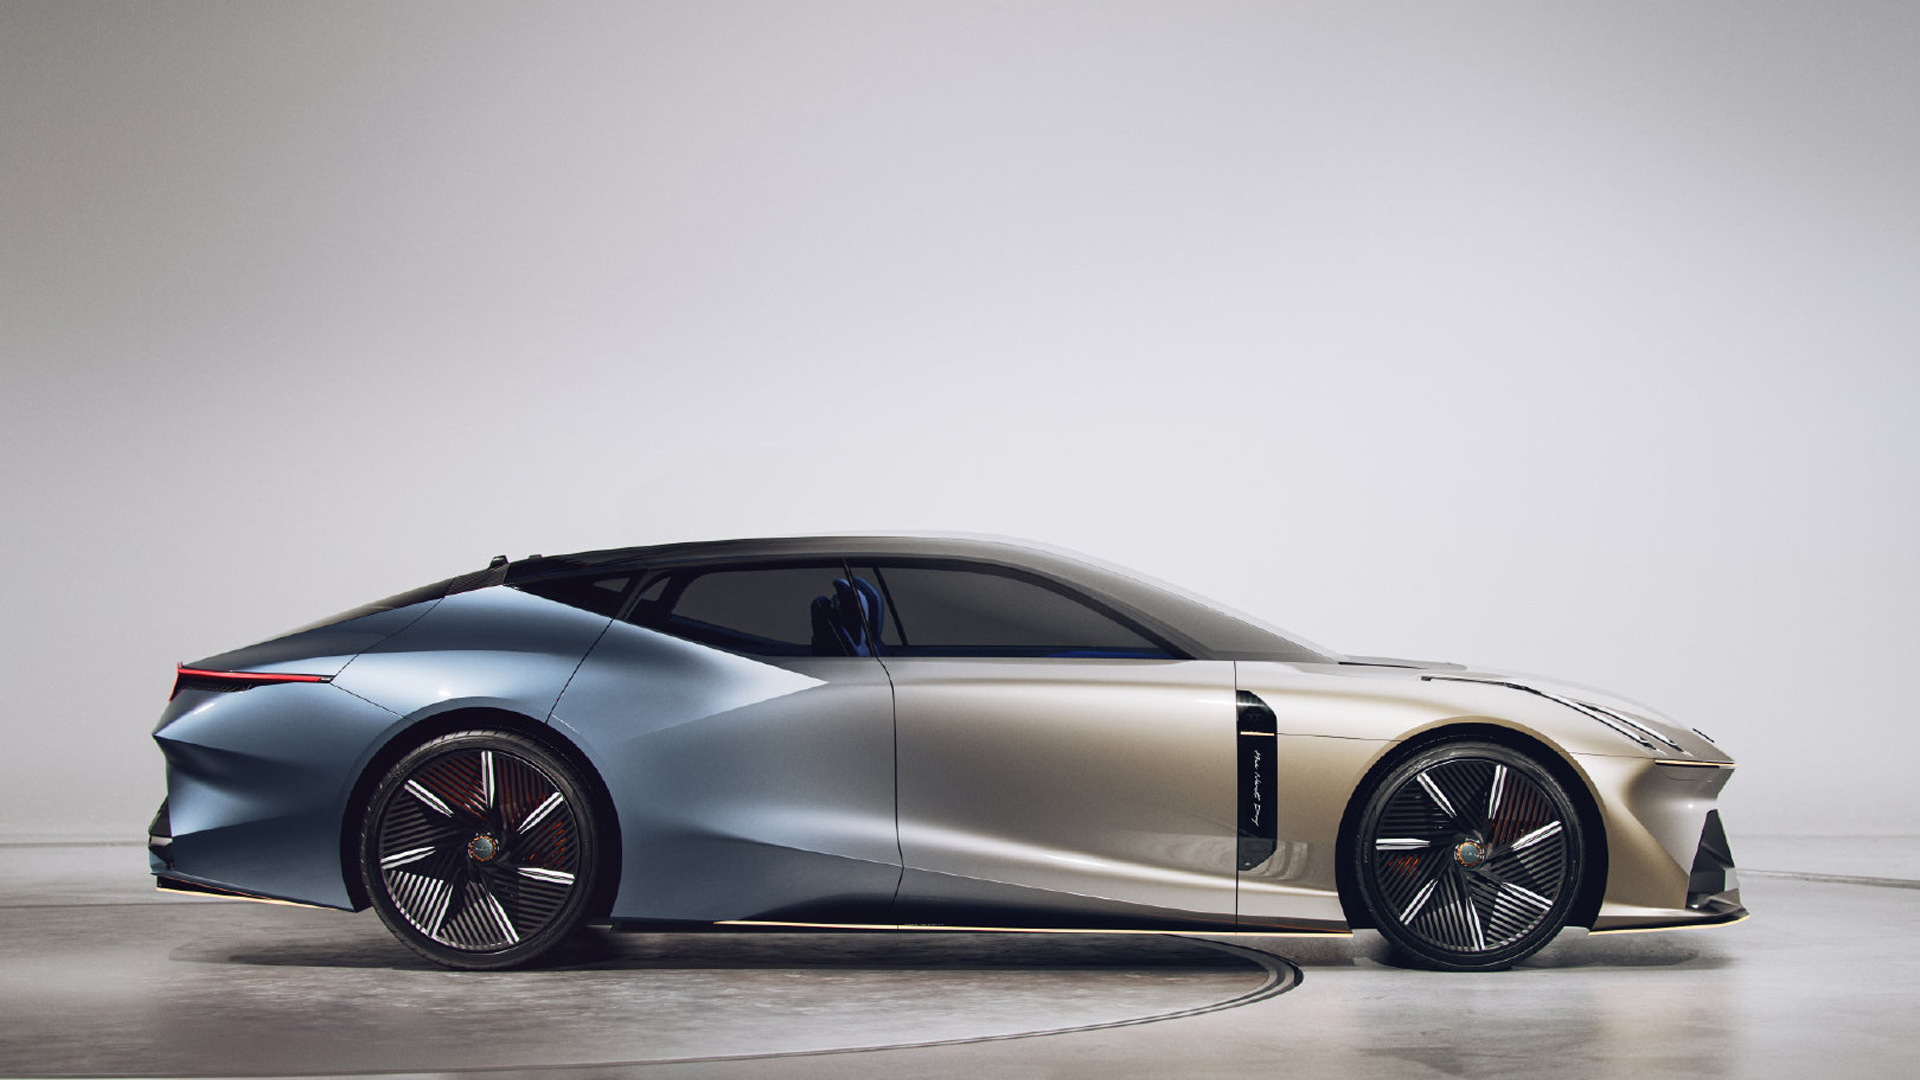 Lynk & Co. The Next Day concept